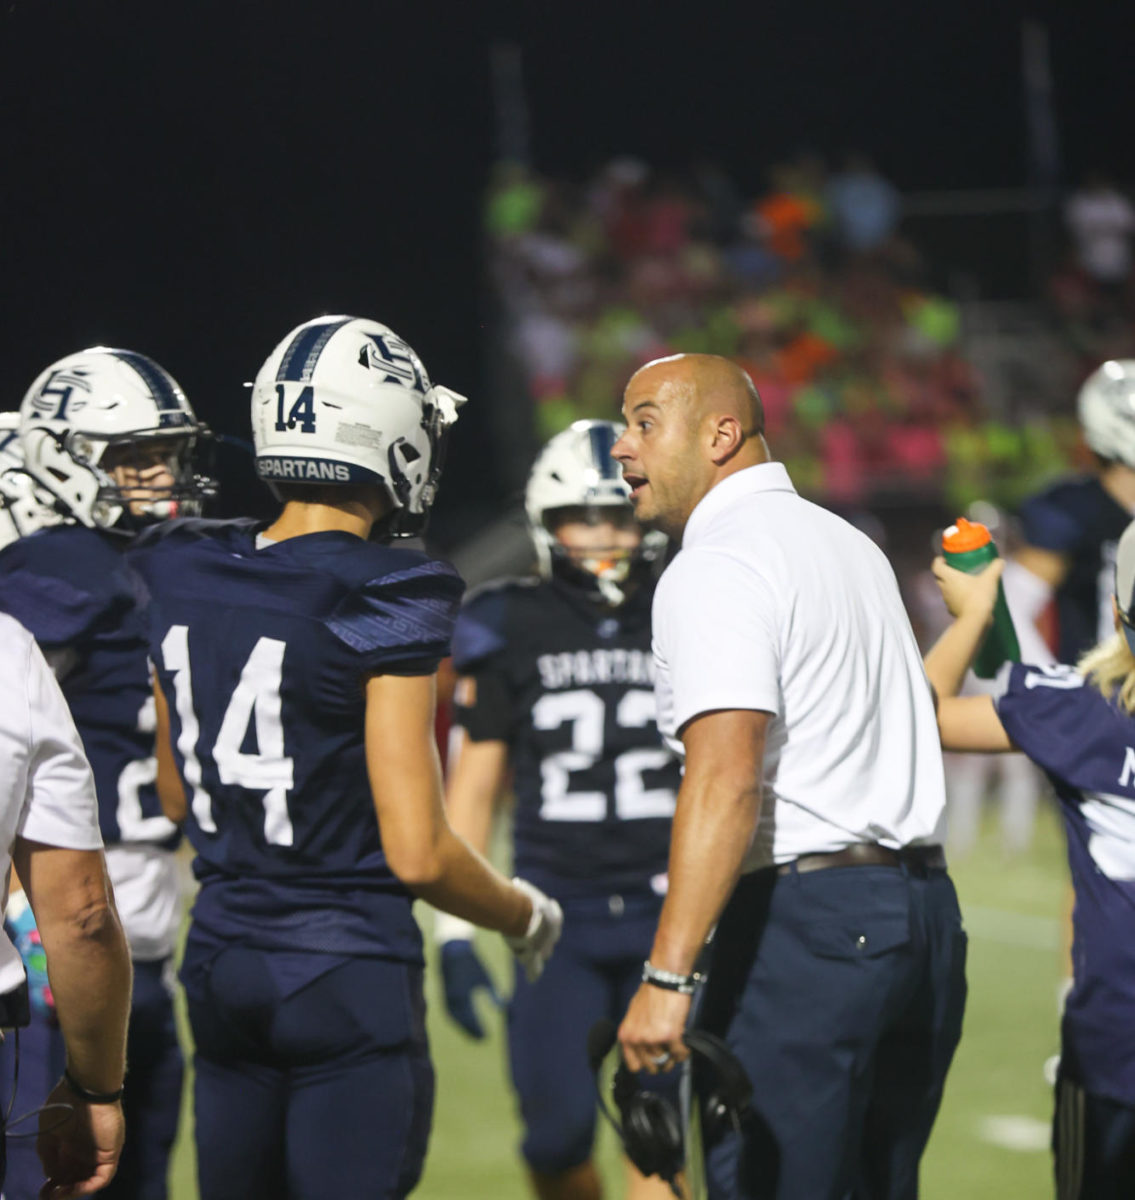 Coach+Malach+Radigan+coaches+Junior+Grayson+Graham+during+a+football+game+against+Fort+Zumwalt+South.+This+year+will+be+Coach+Radigans+third+year+as+head+football+coach+at+Francis+Howell+Central.